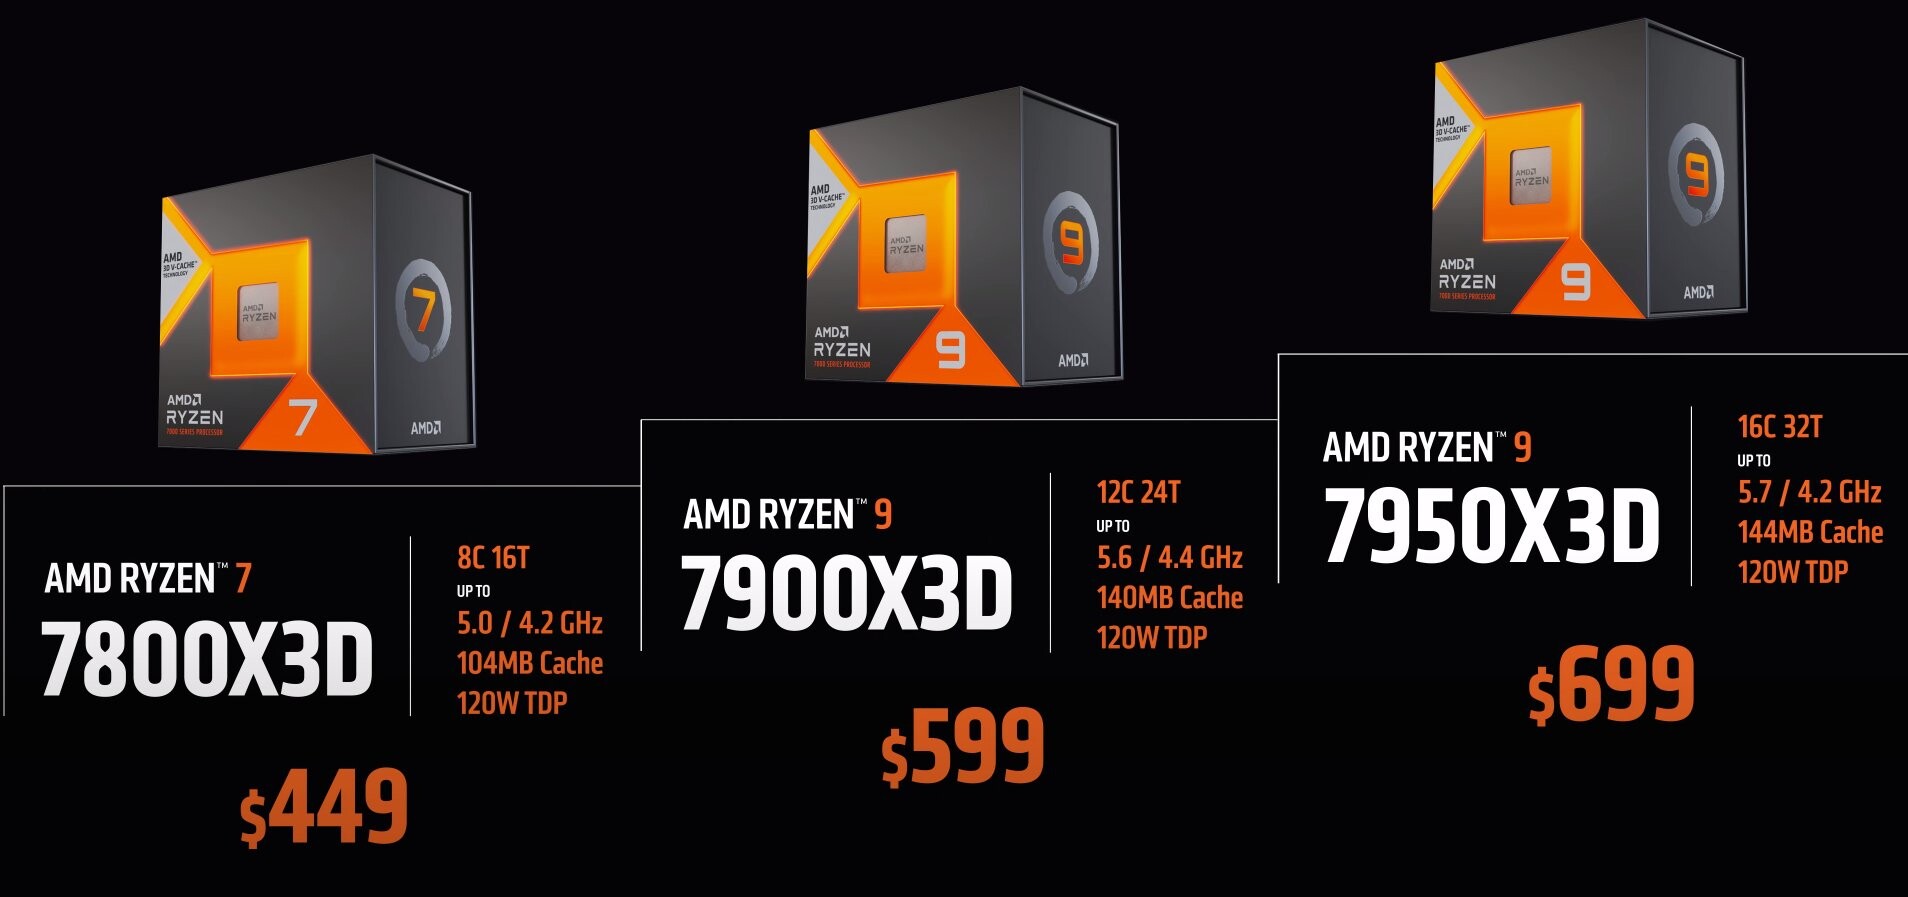 Boosting 10% Game Performance With Ryzen™ 7 7800X3D Processor And MSI  Exclusive Enhanced Mode Boost